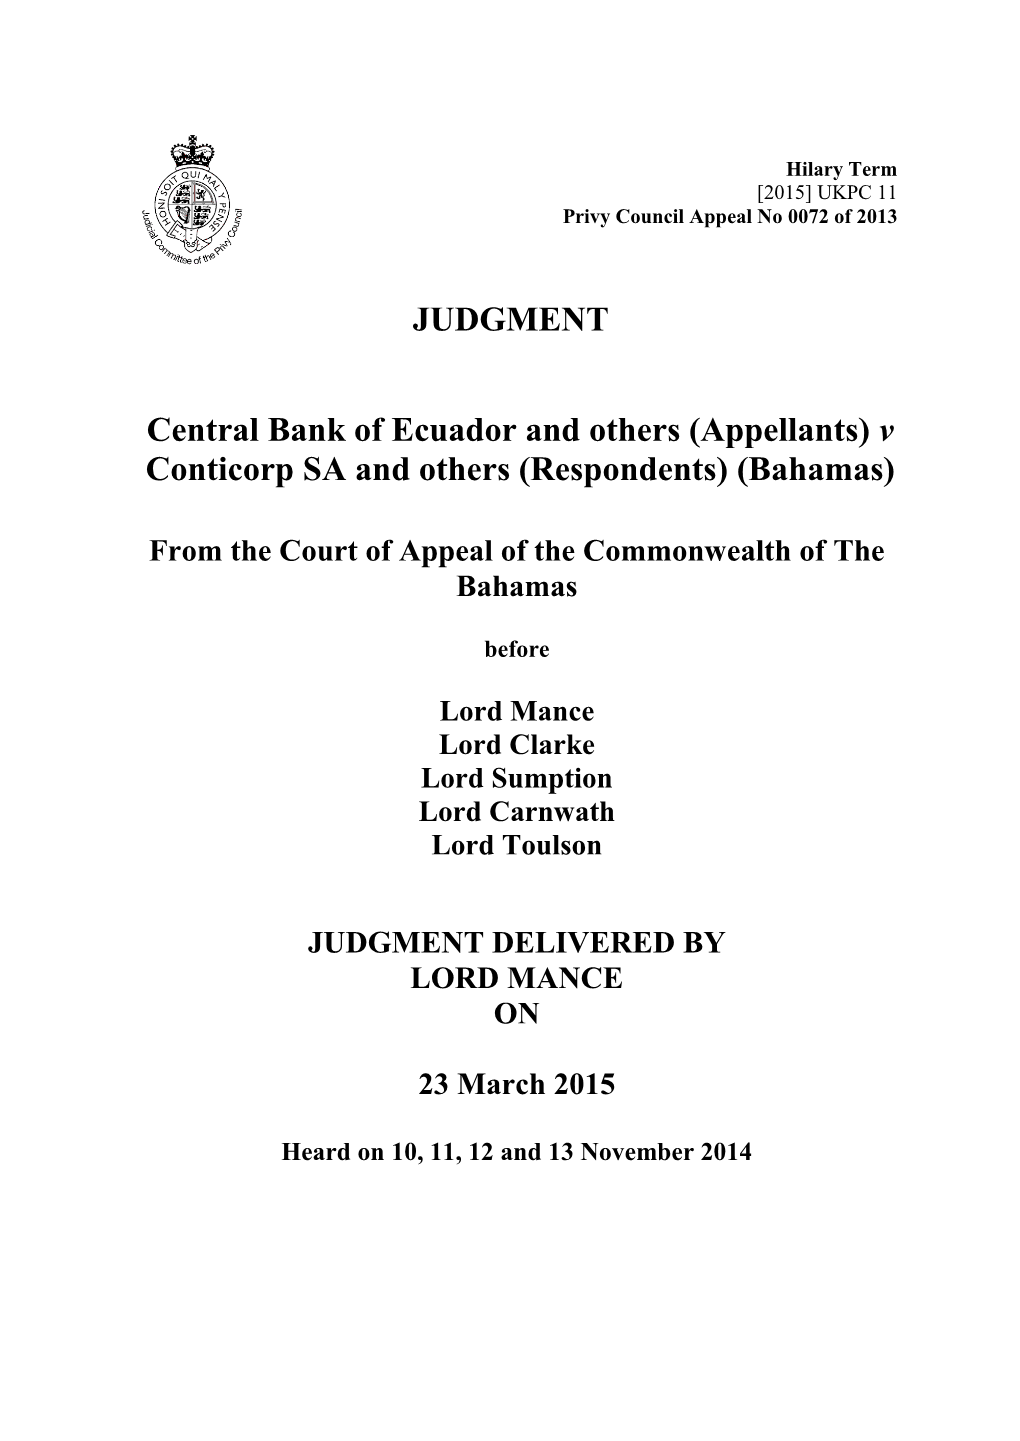 Central Bank of Ecuador and Others (Appellants) V Conticorp SA and Others (Respondents) (Bahamas)